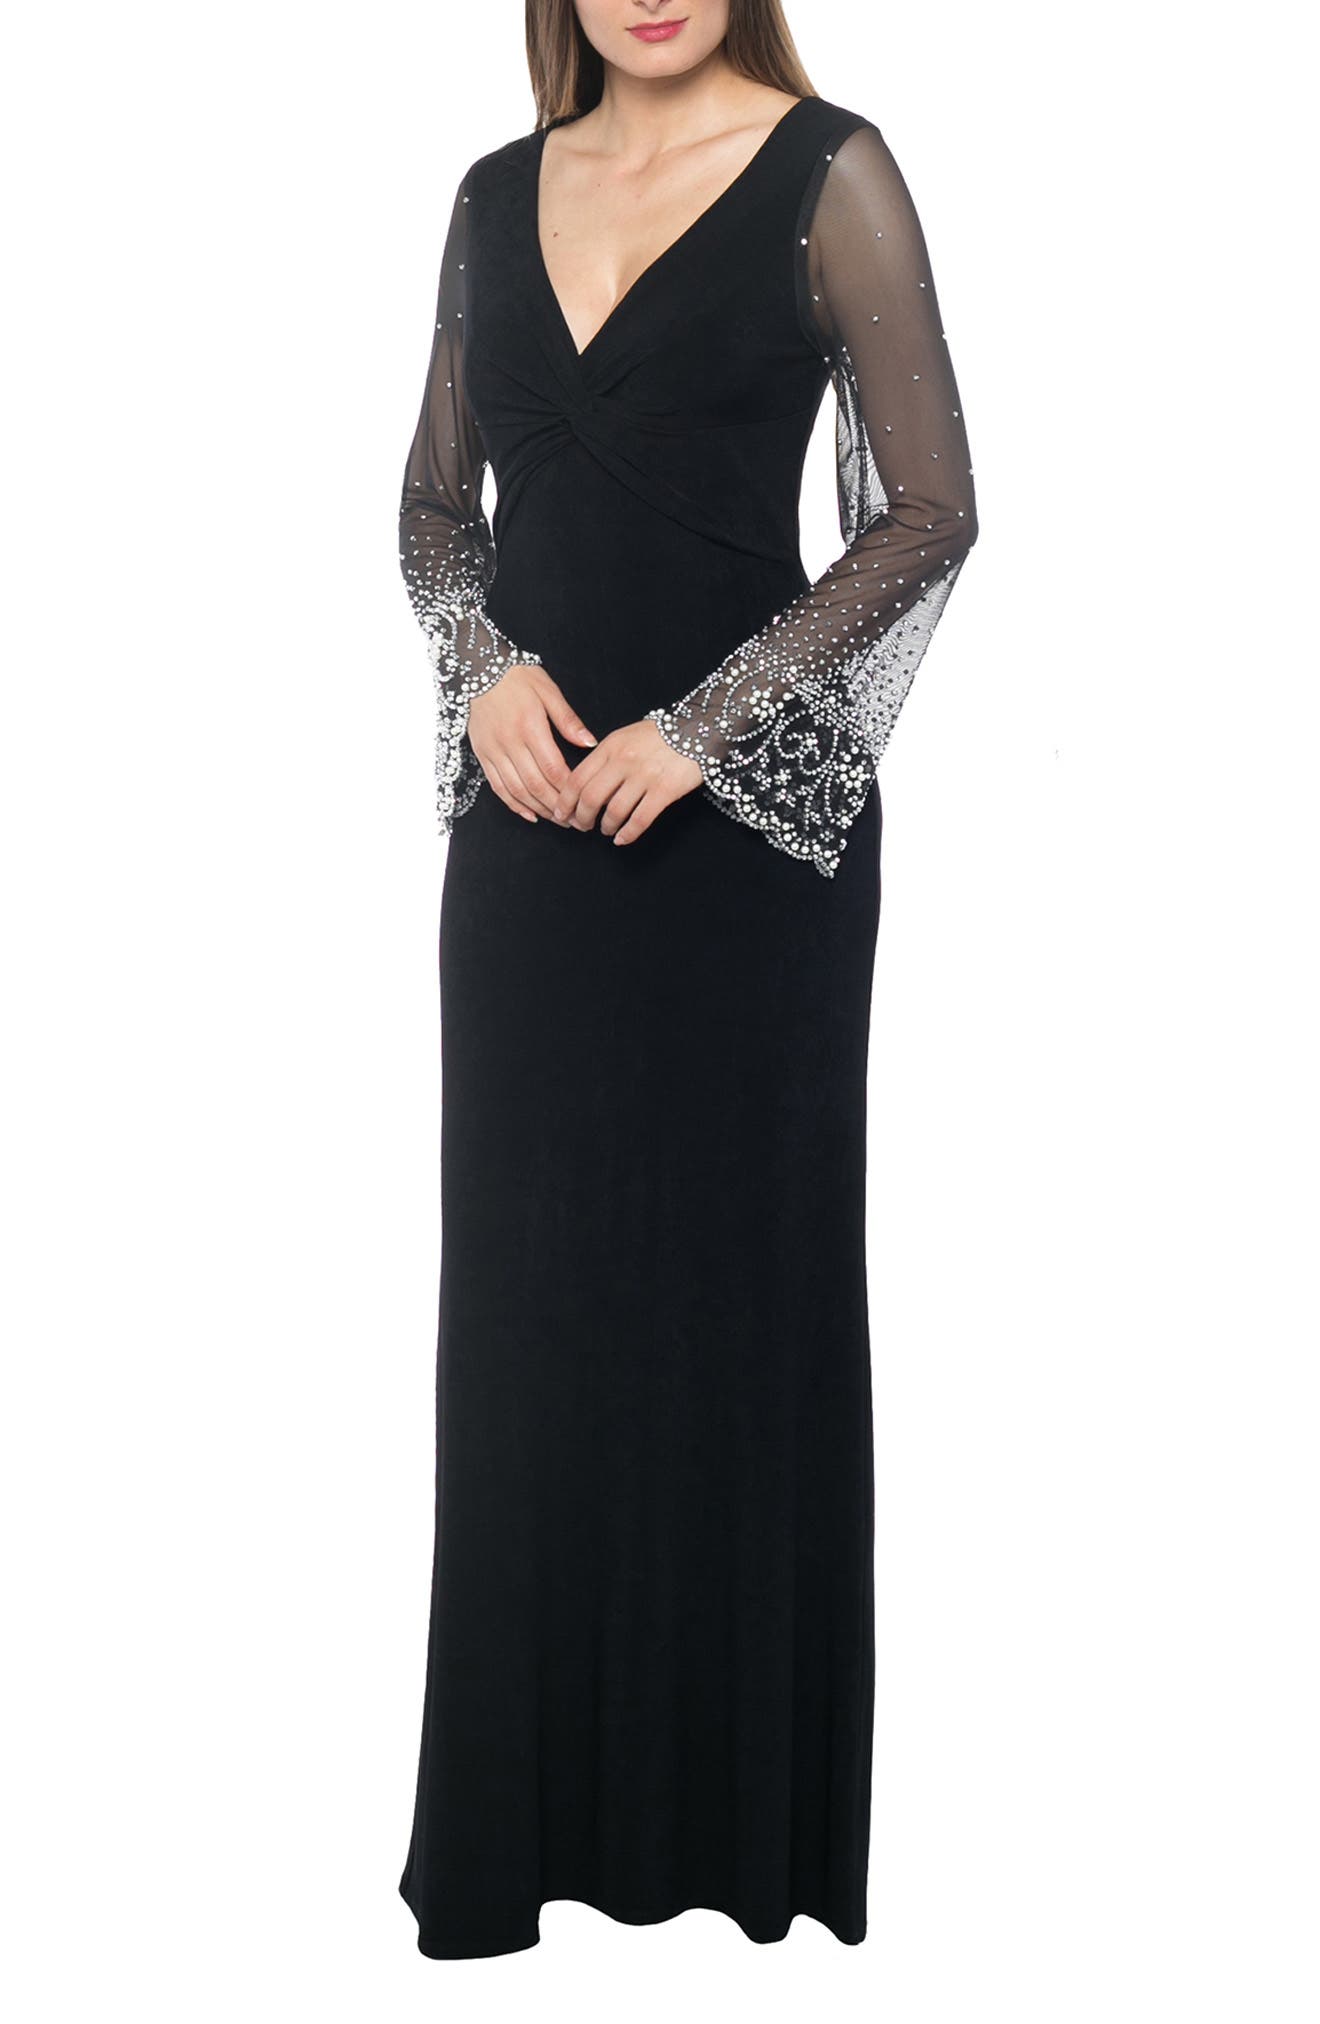 70s Clothes & 1970s Fashion Marina Beaded Sheer Sleeve Gown in Black at Nordstrom Rack Size 14 $96.97 AT vintagedancer.com